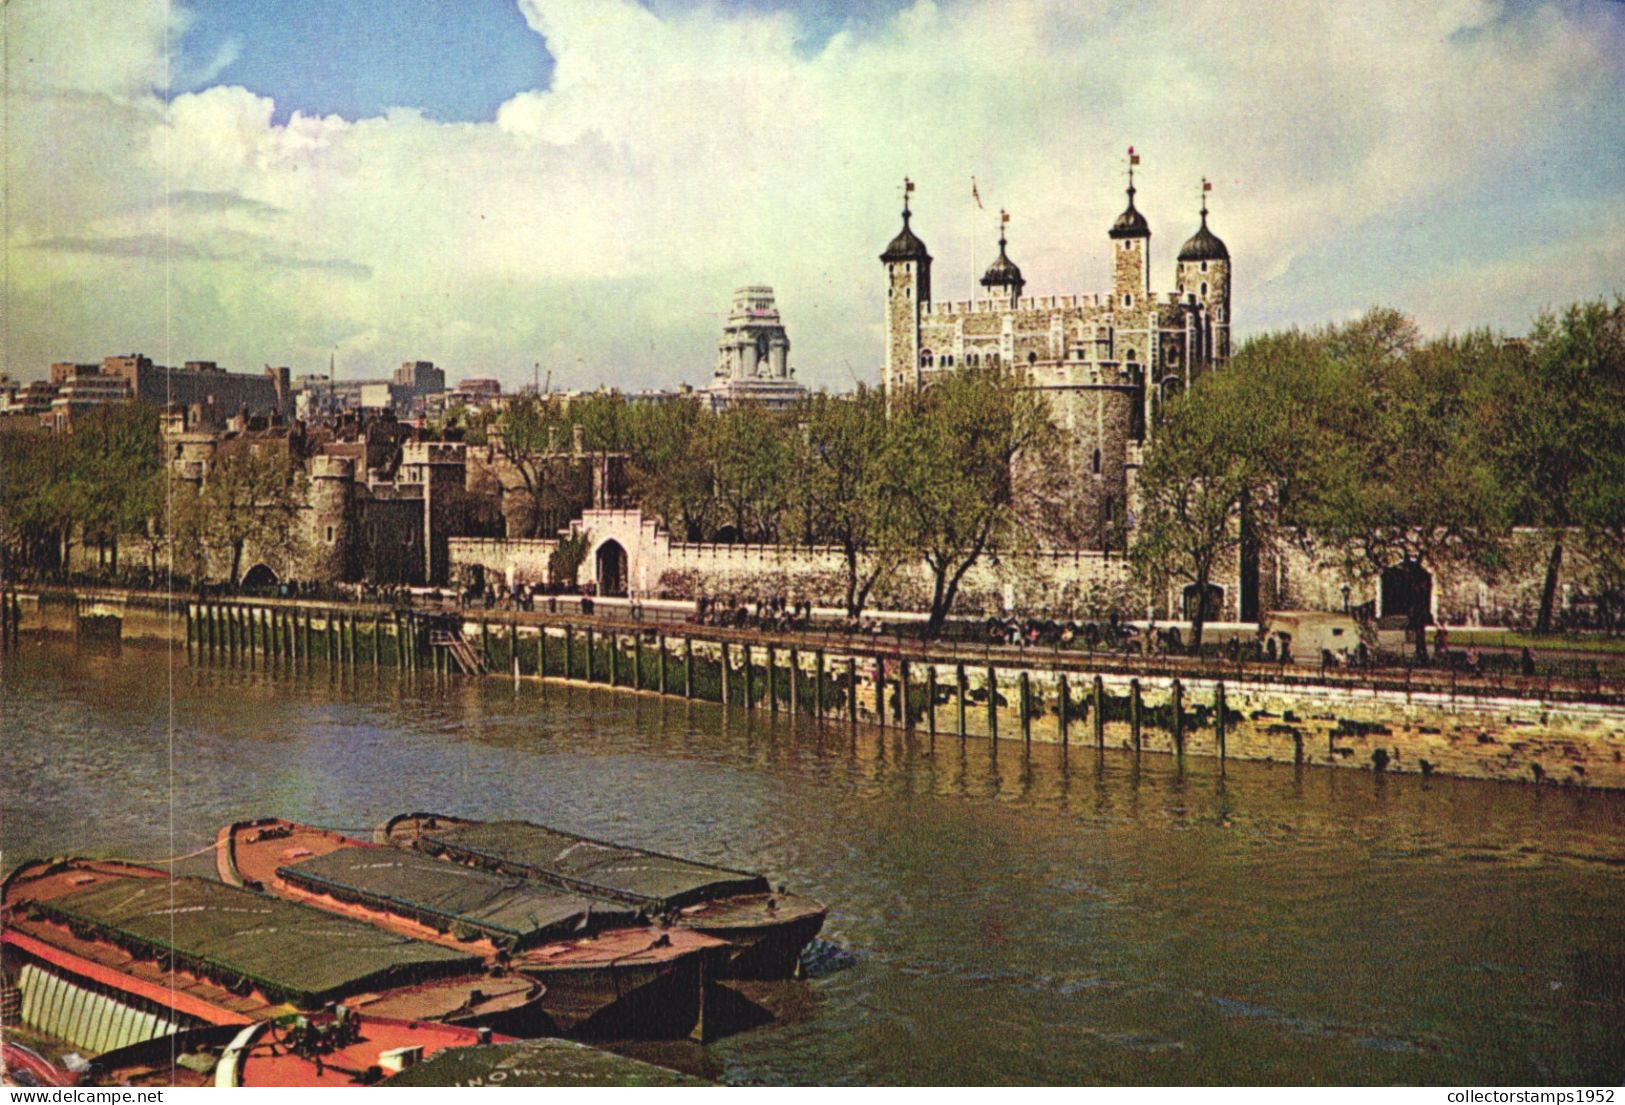 LONDON, TOWER OF LONDON, ARCHITECTURE, BOATS, CASTLE, ENGLAND, UNITED KINGDOM, POSTCARD - Tower Of London